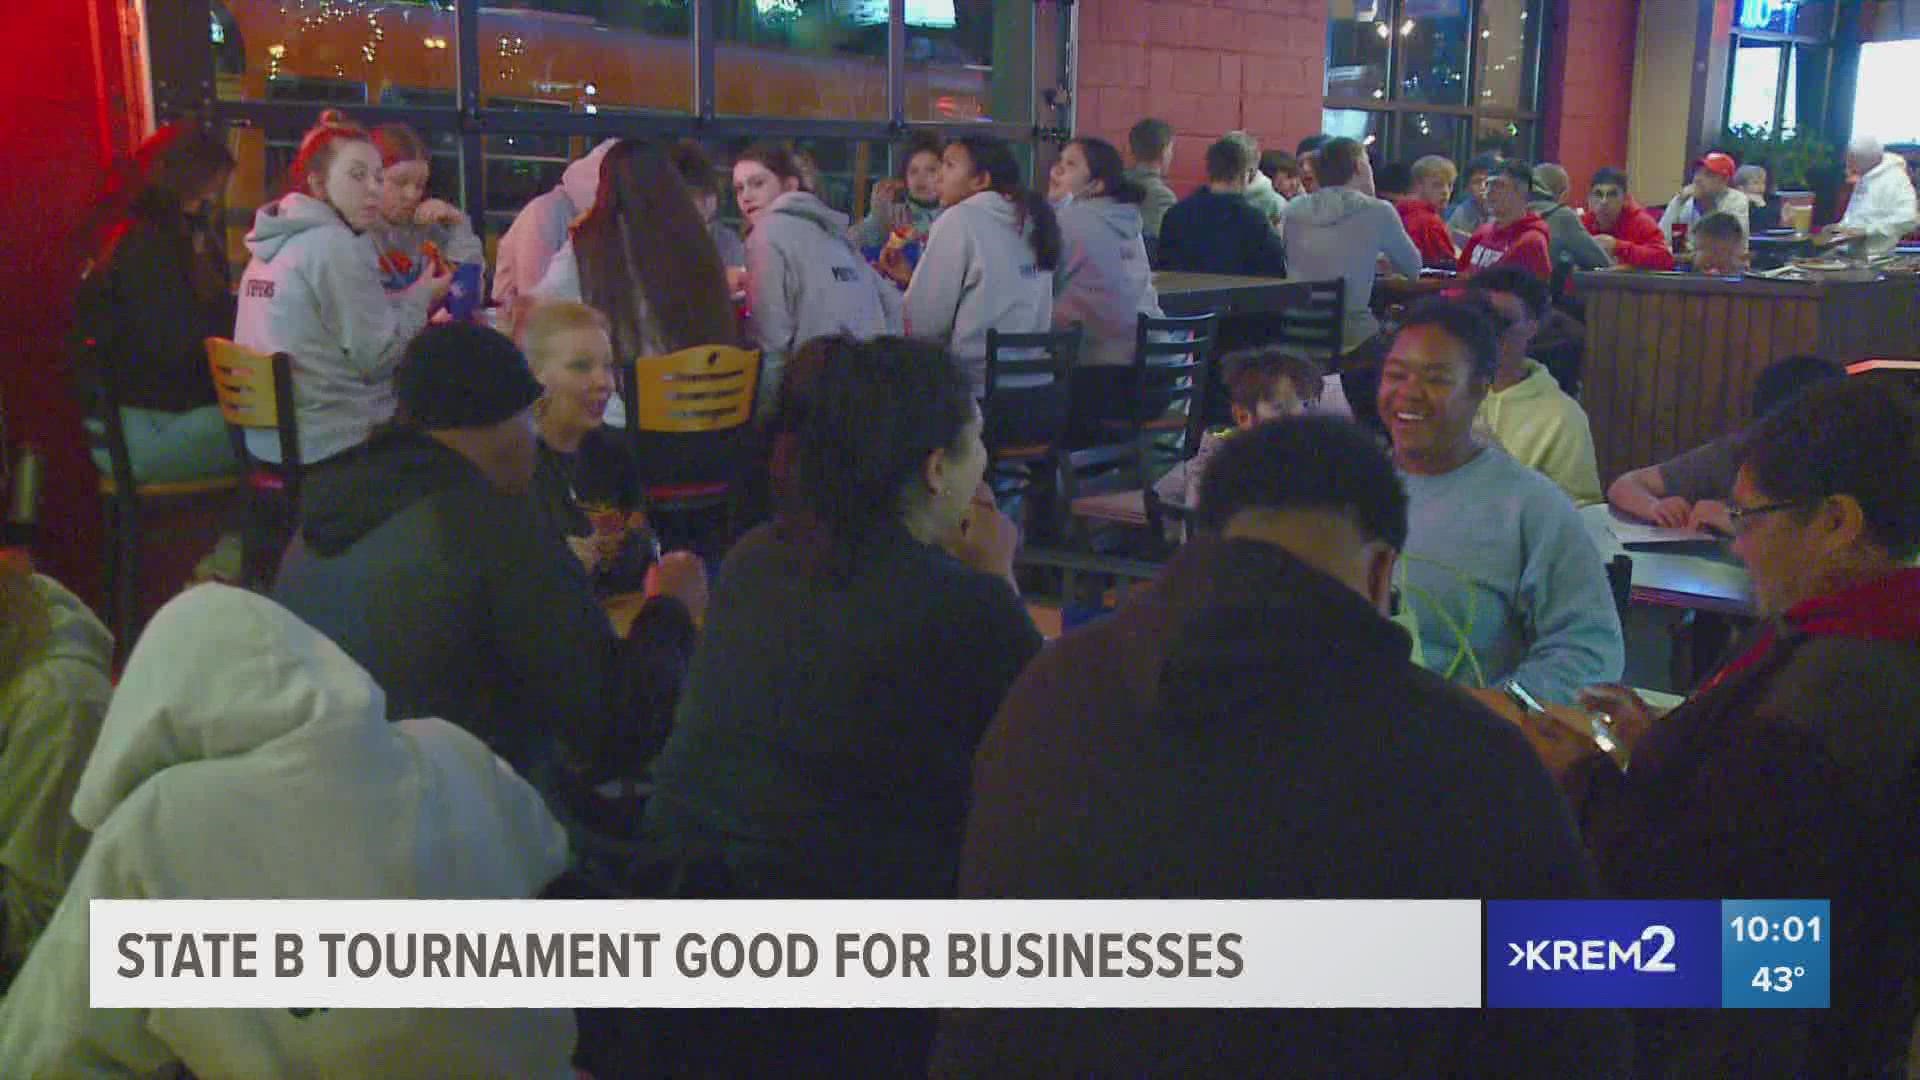 Hundreds of high school athletes are taking over the Spokane arena as the State B Basketball Tournament returns for the first time since the start of the pandemic.